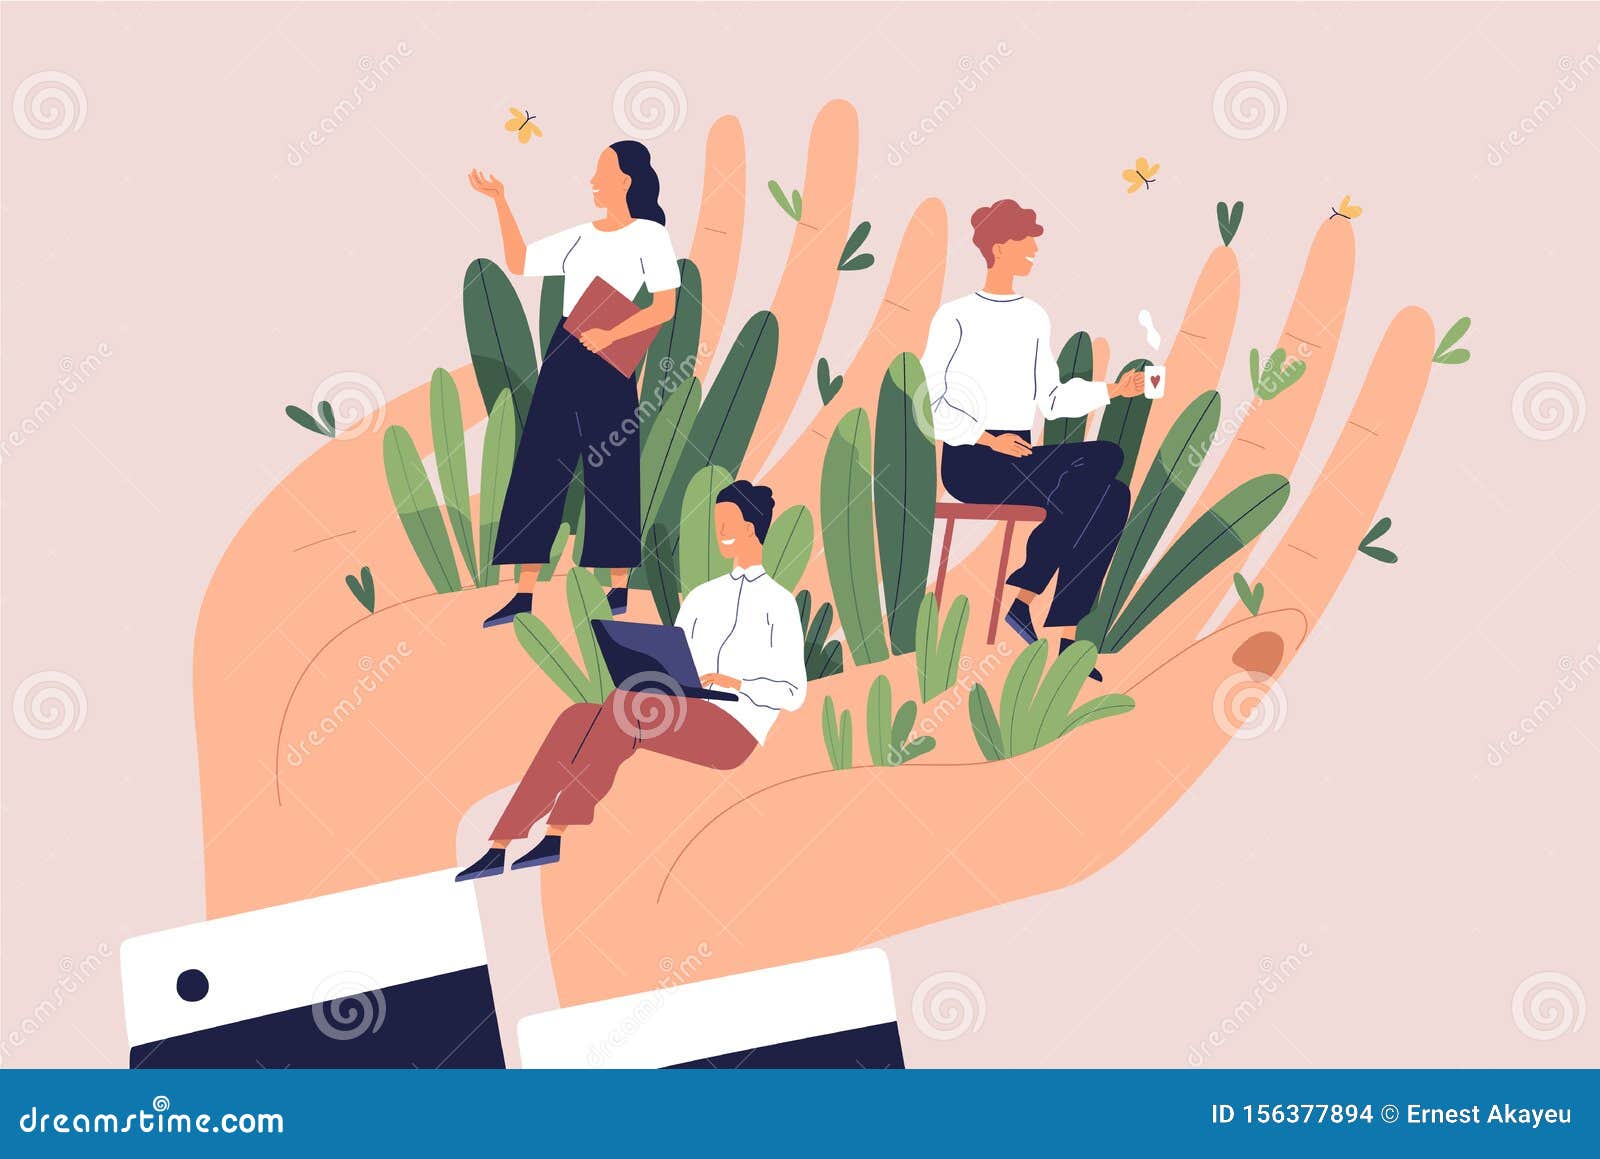 giant hands holding tiny office workers. concept of employee care, wellbeing at work or workplace, perks and benefits